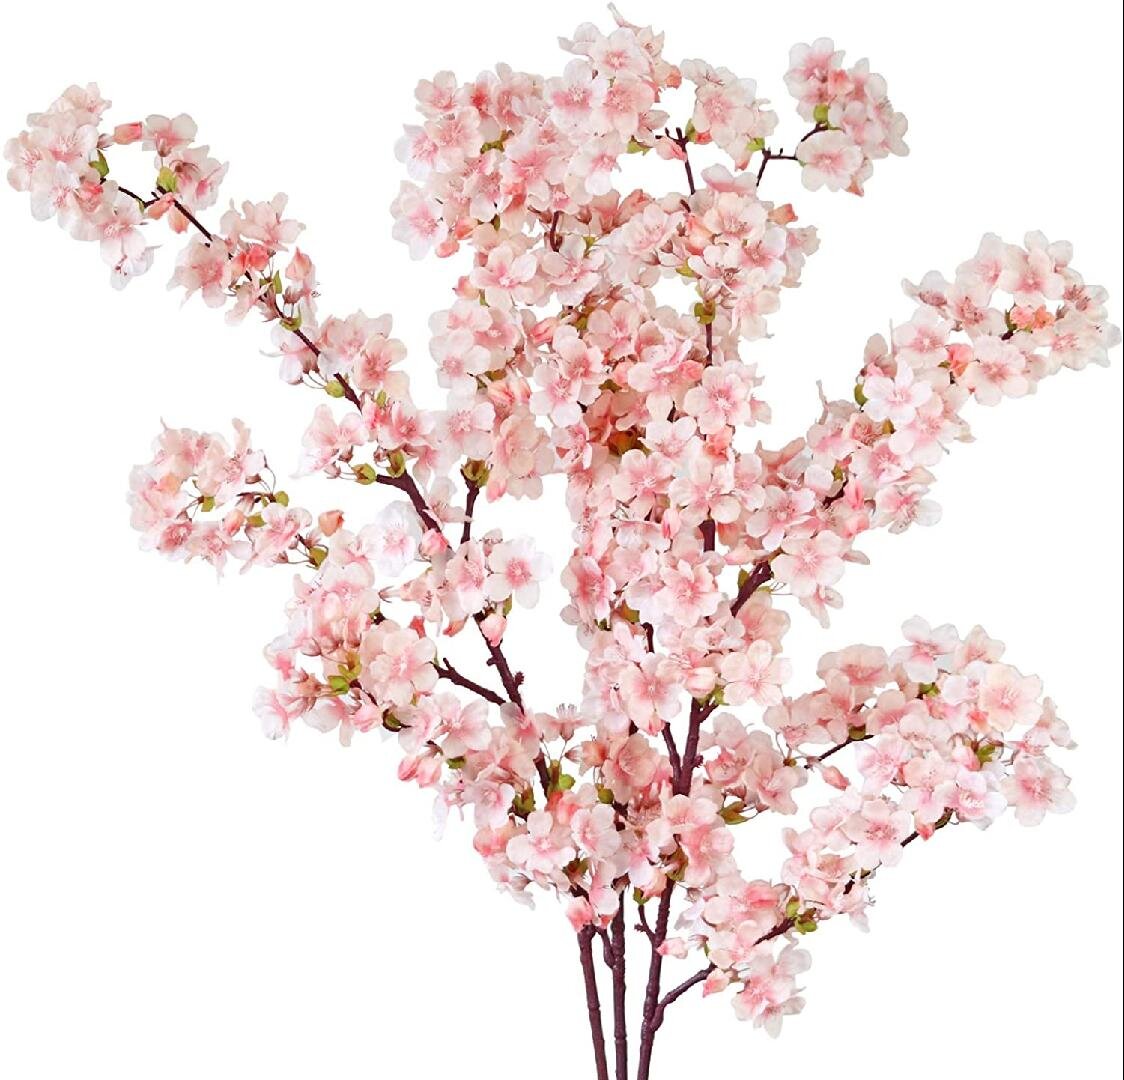 3 Pcs, Ivory Sggvecsy Artificial Cherry Blossom Branches Faux Cherry Flowers 39 Inch Peach Branches Silk Tall Stems for Home Wedding Table Vase Decor